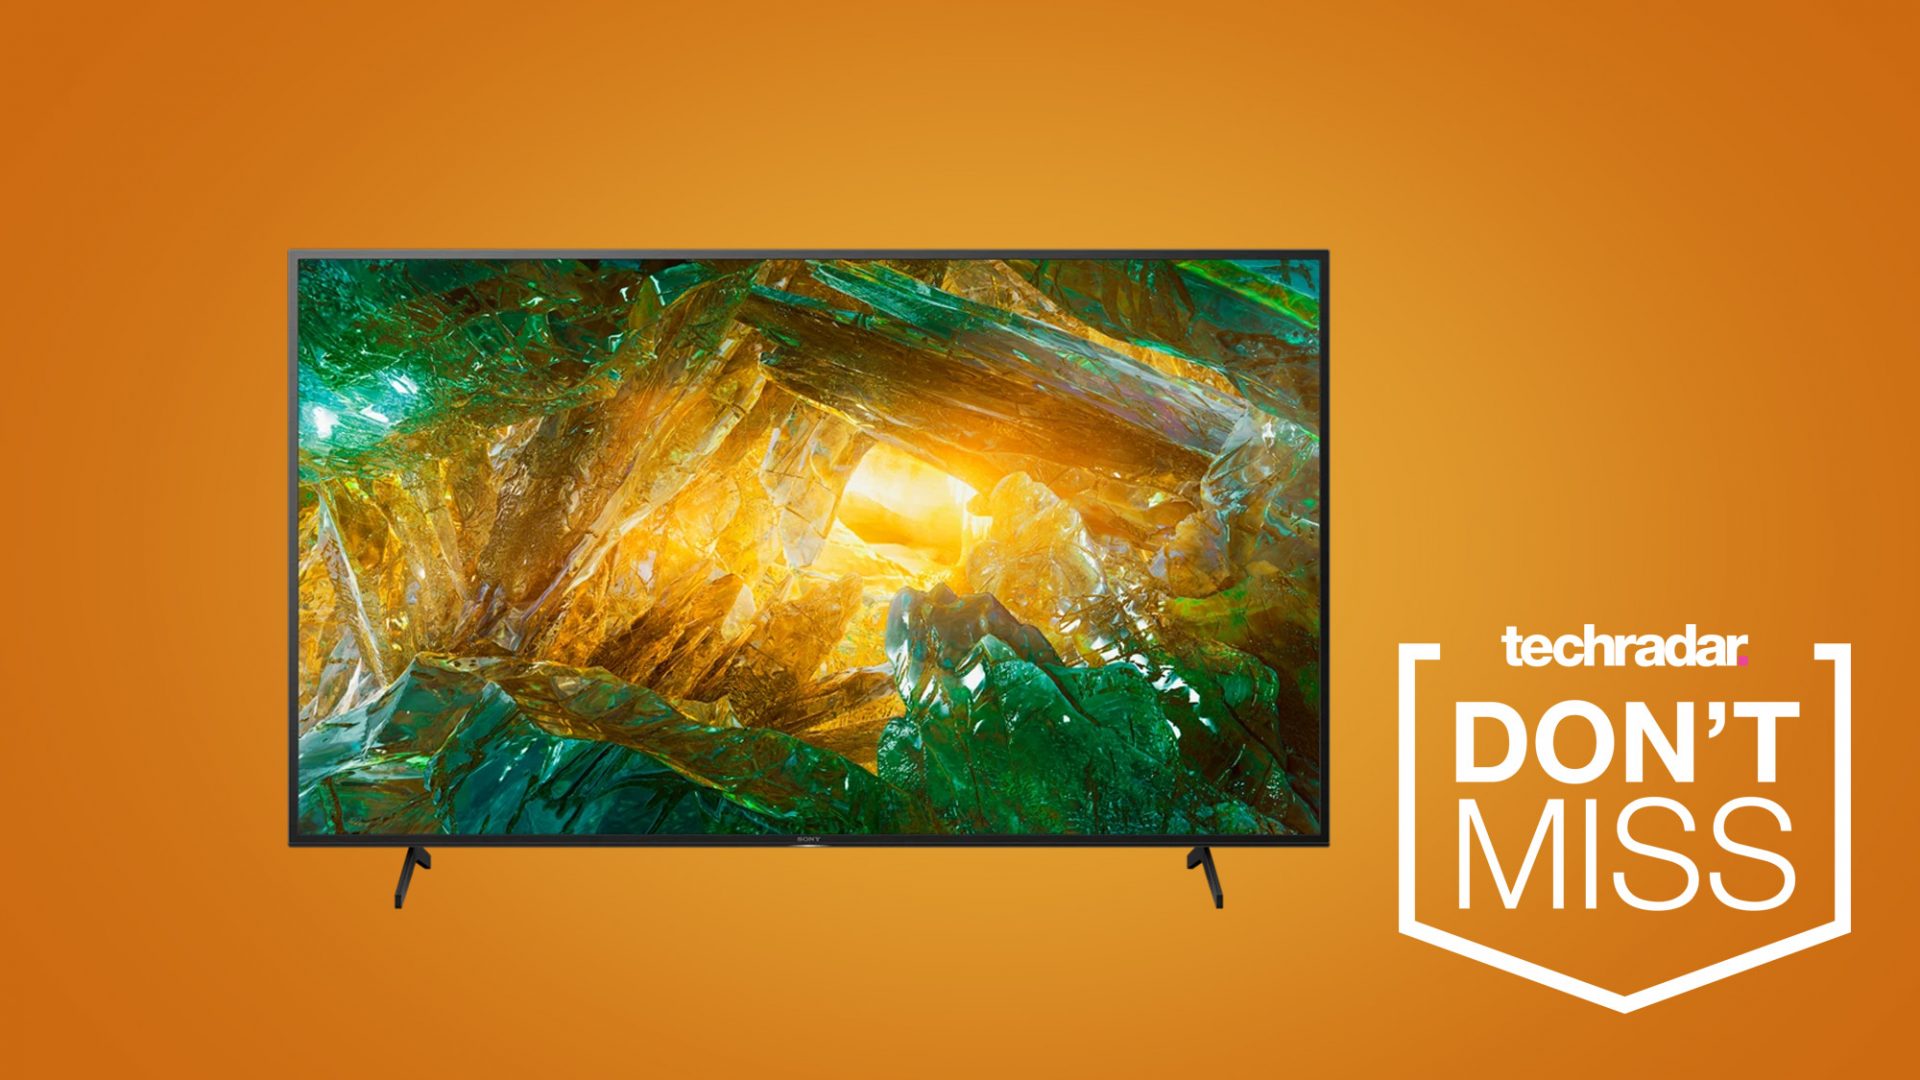 Sony Bravia TVs are up to £300 off at Currys this weekend